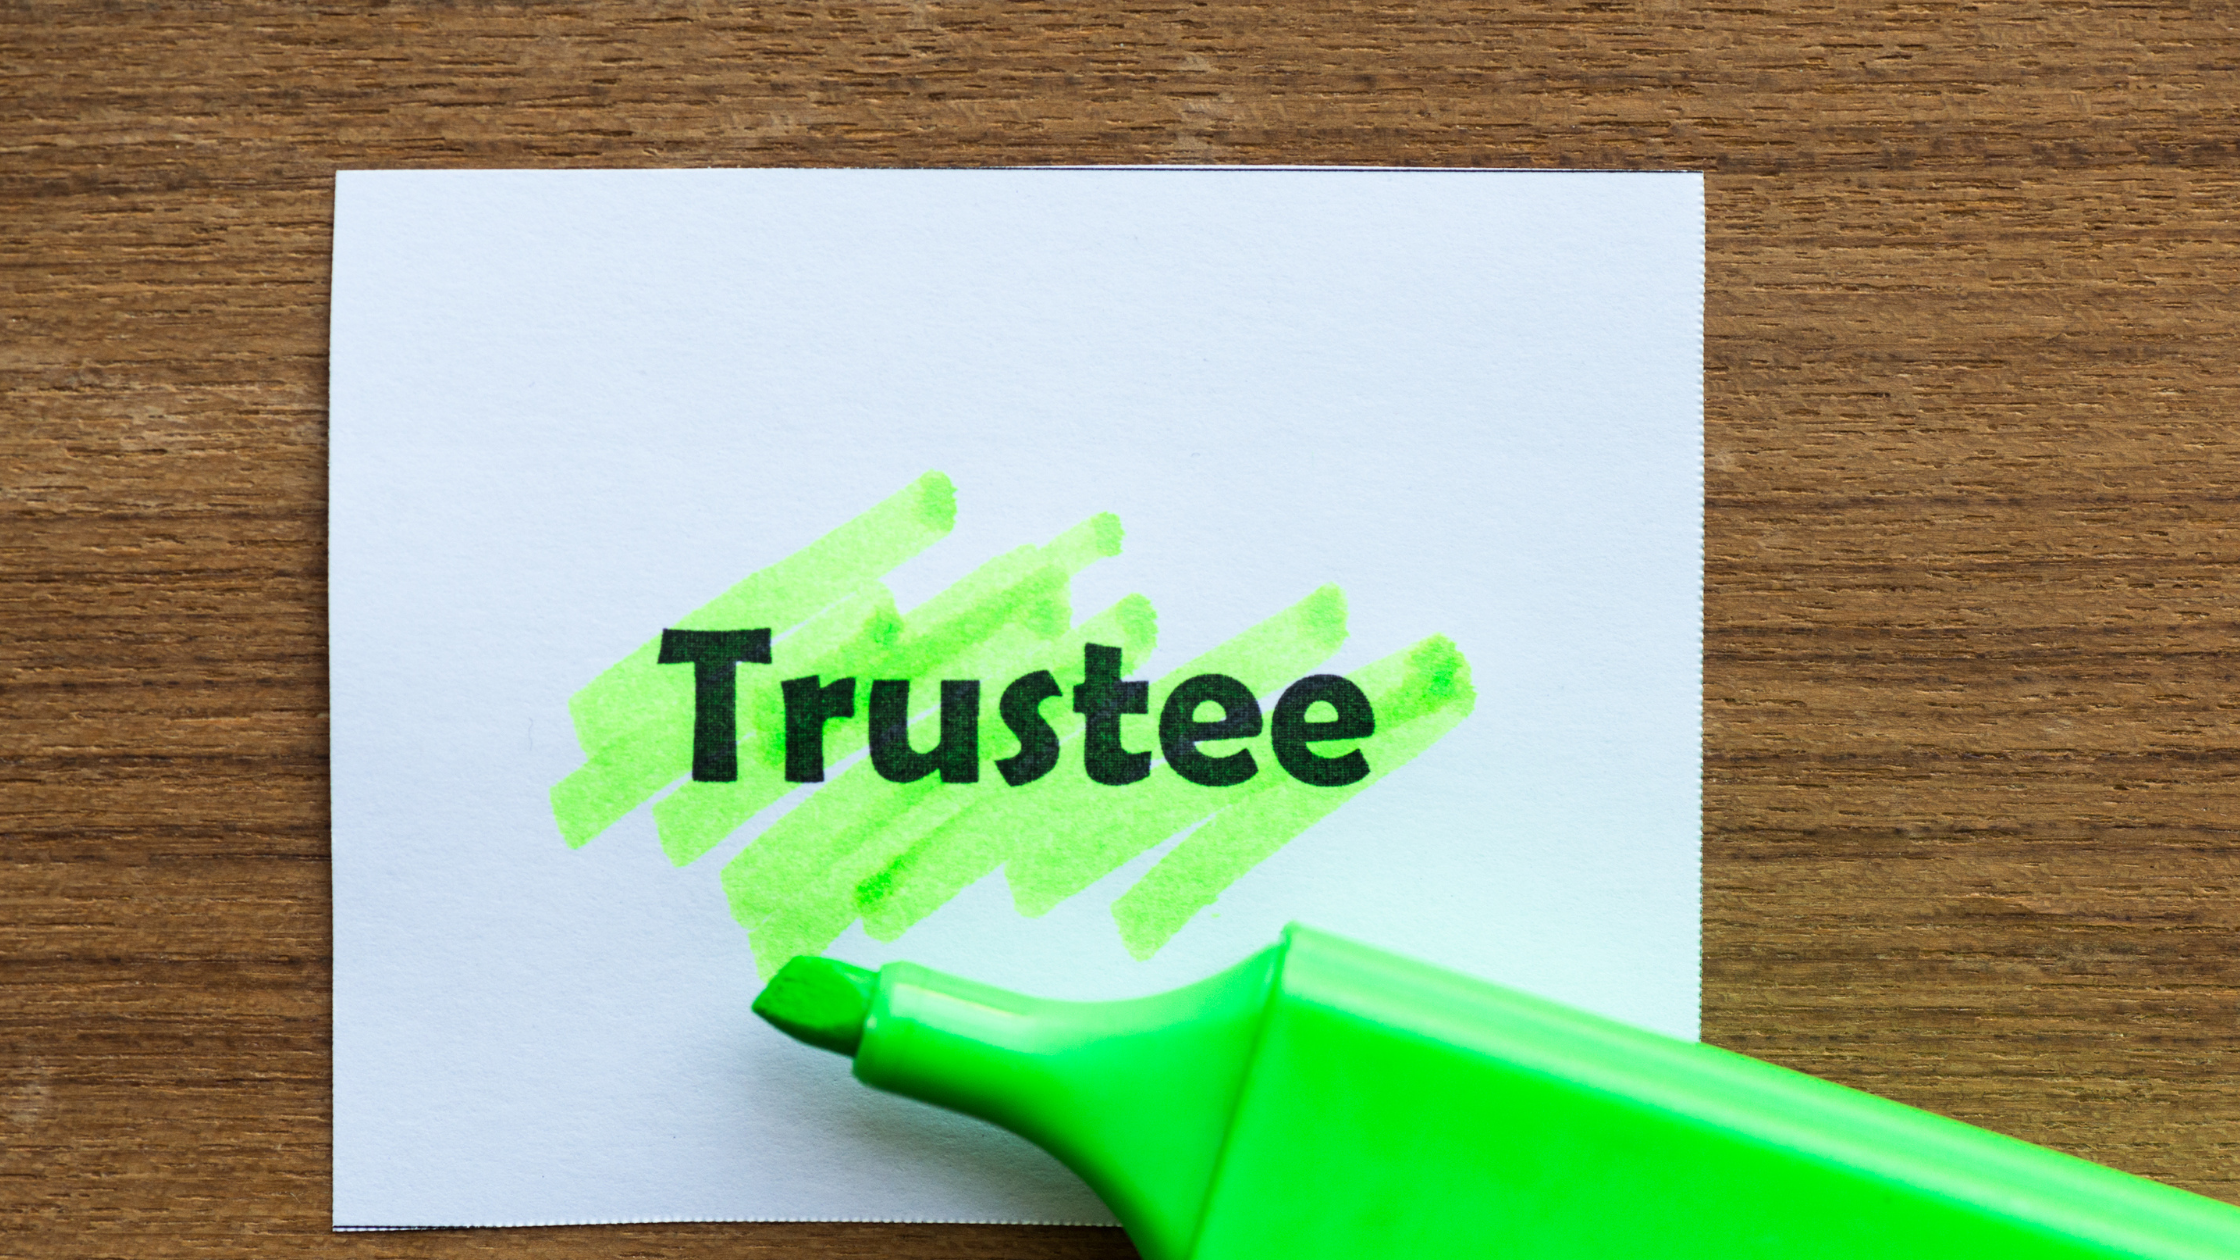 Trustee Duty: Act in the Best Interest of the Beneficiary